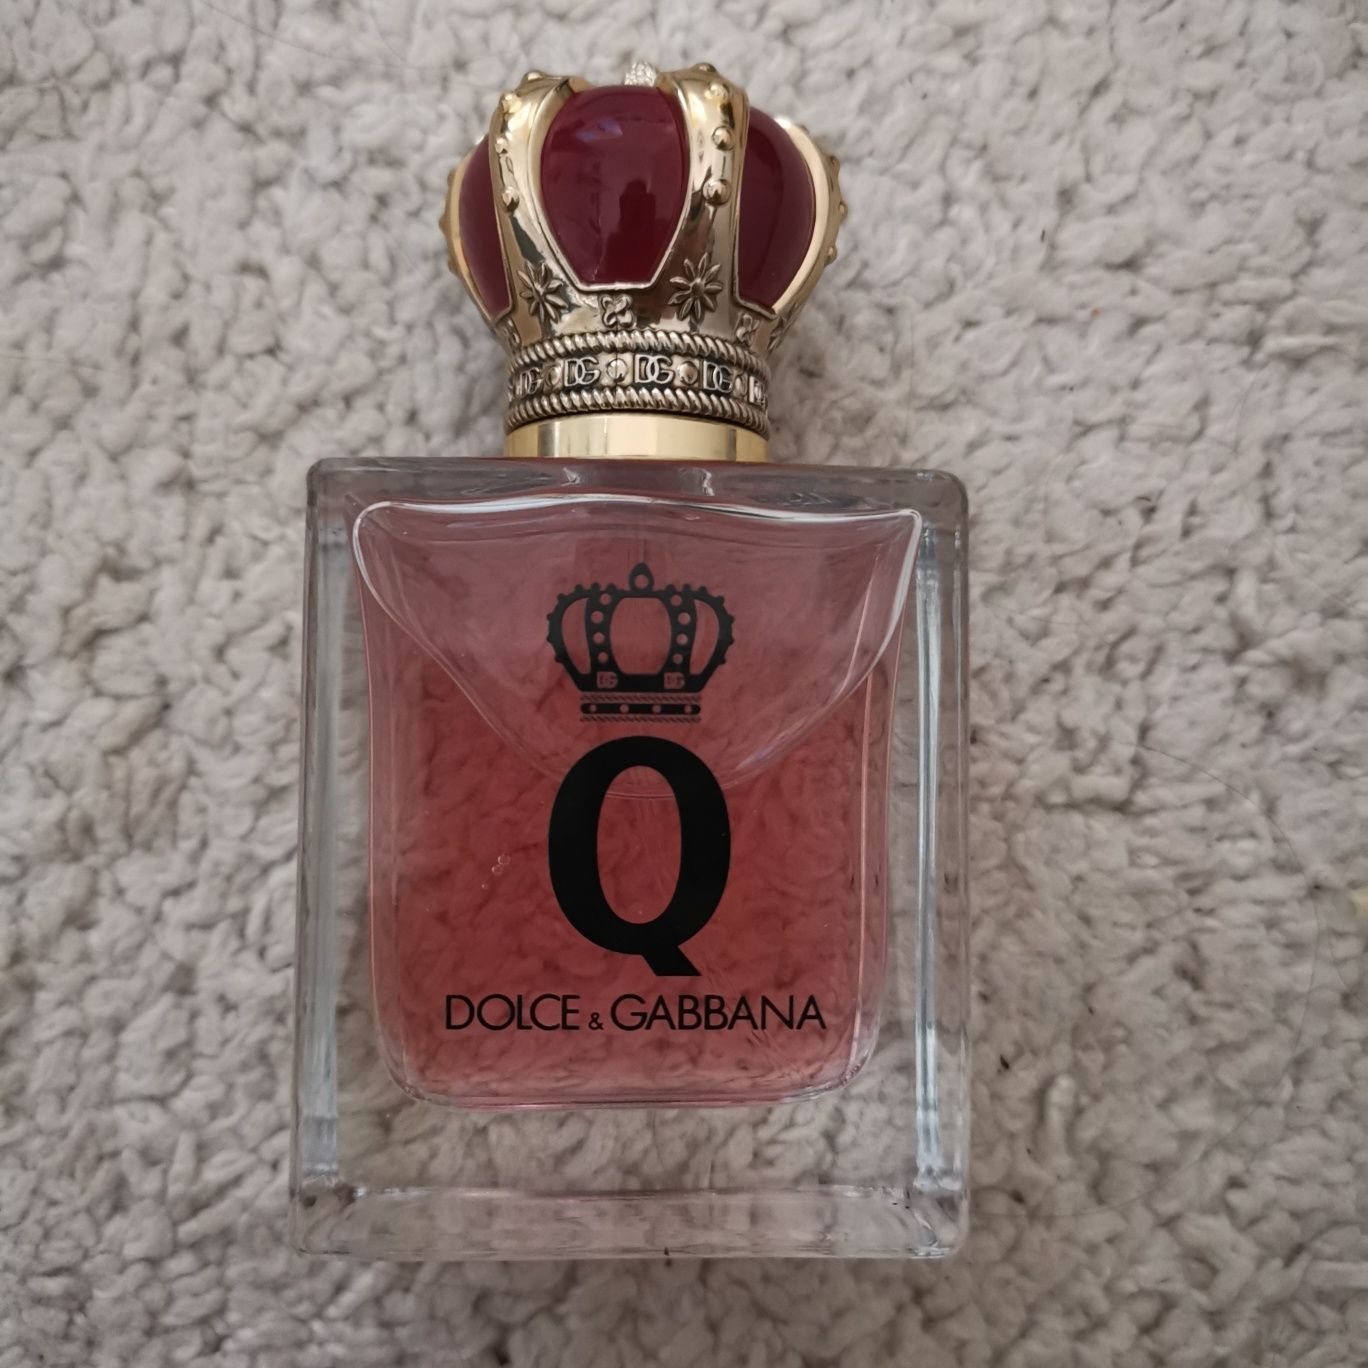 Парфюм Dolce and gabbana Queen